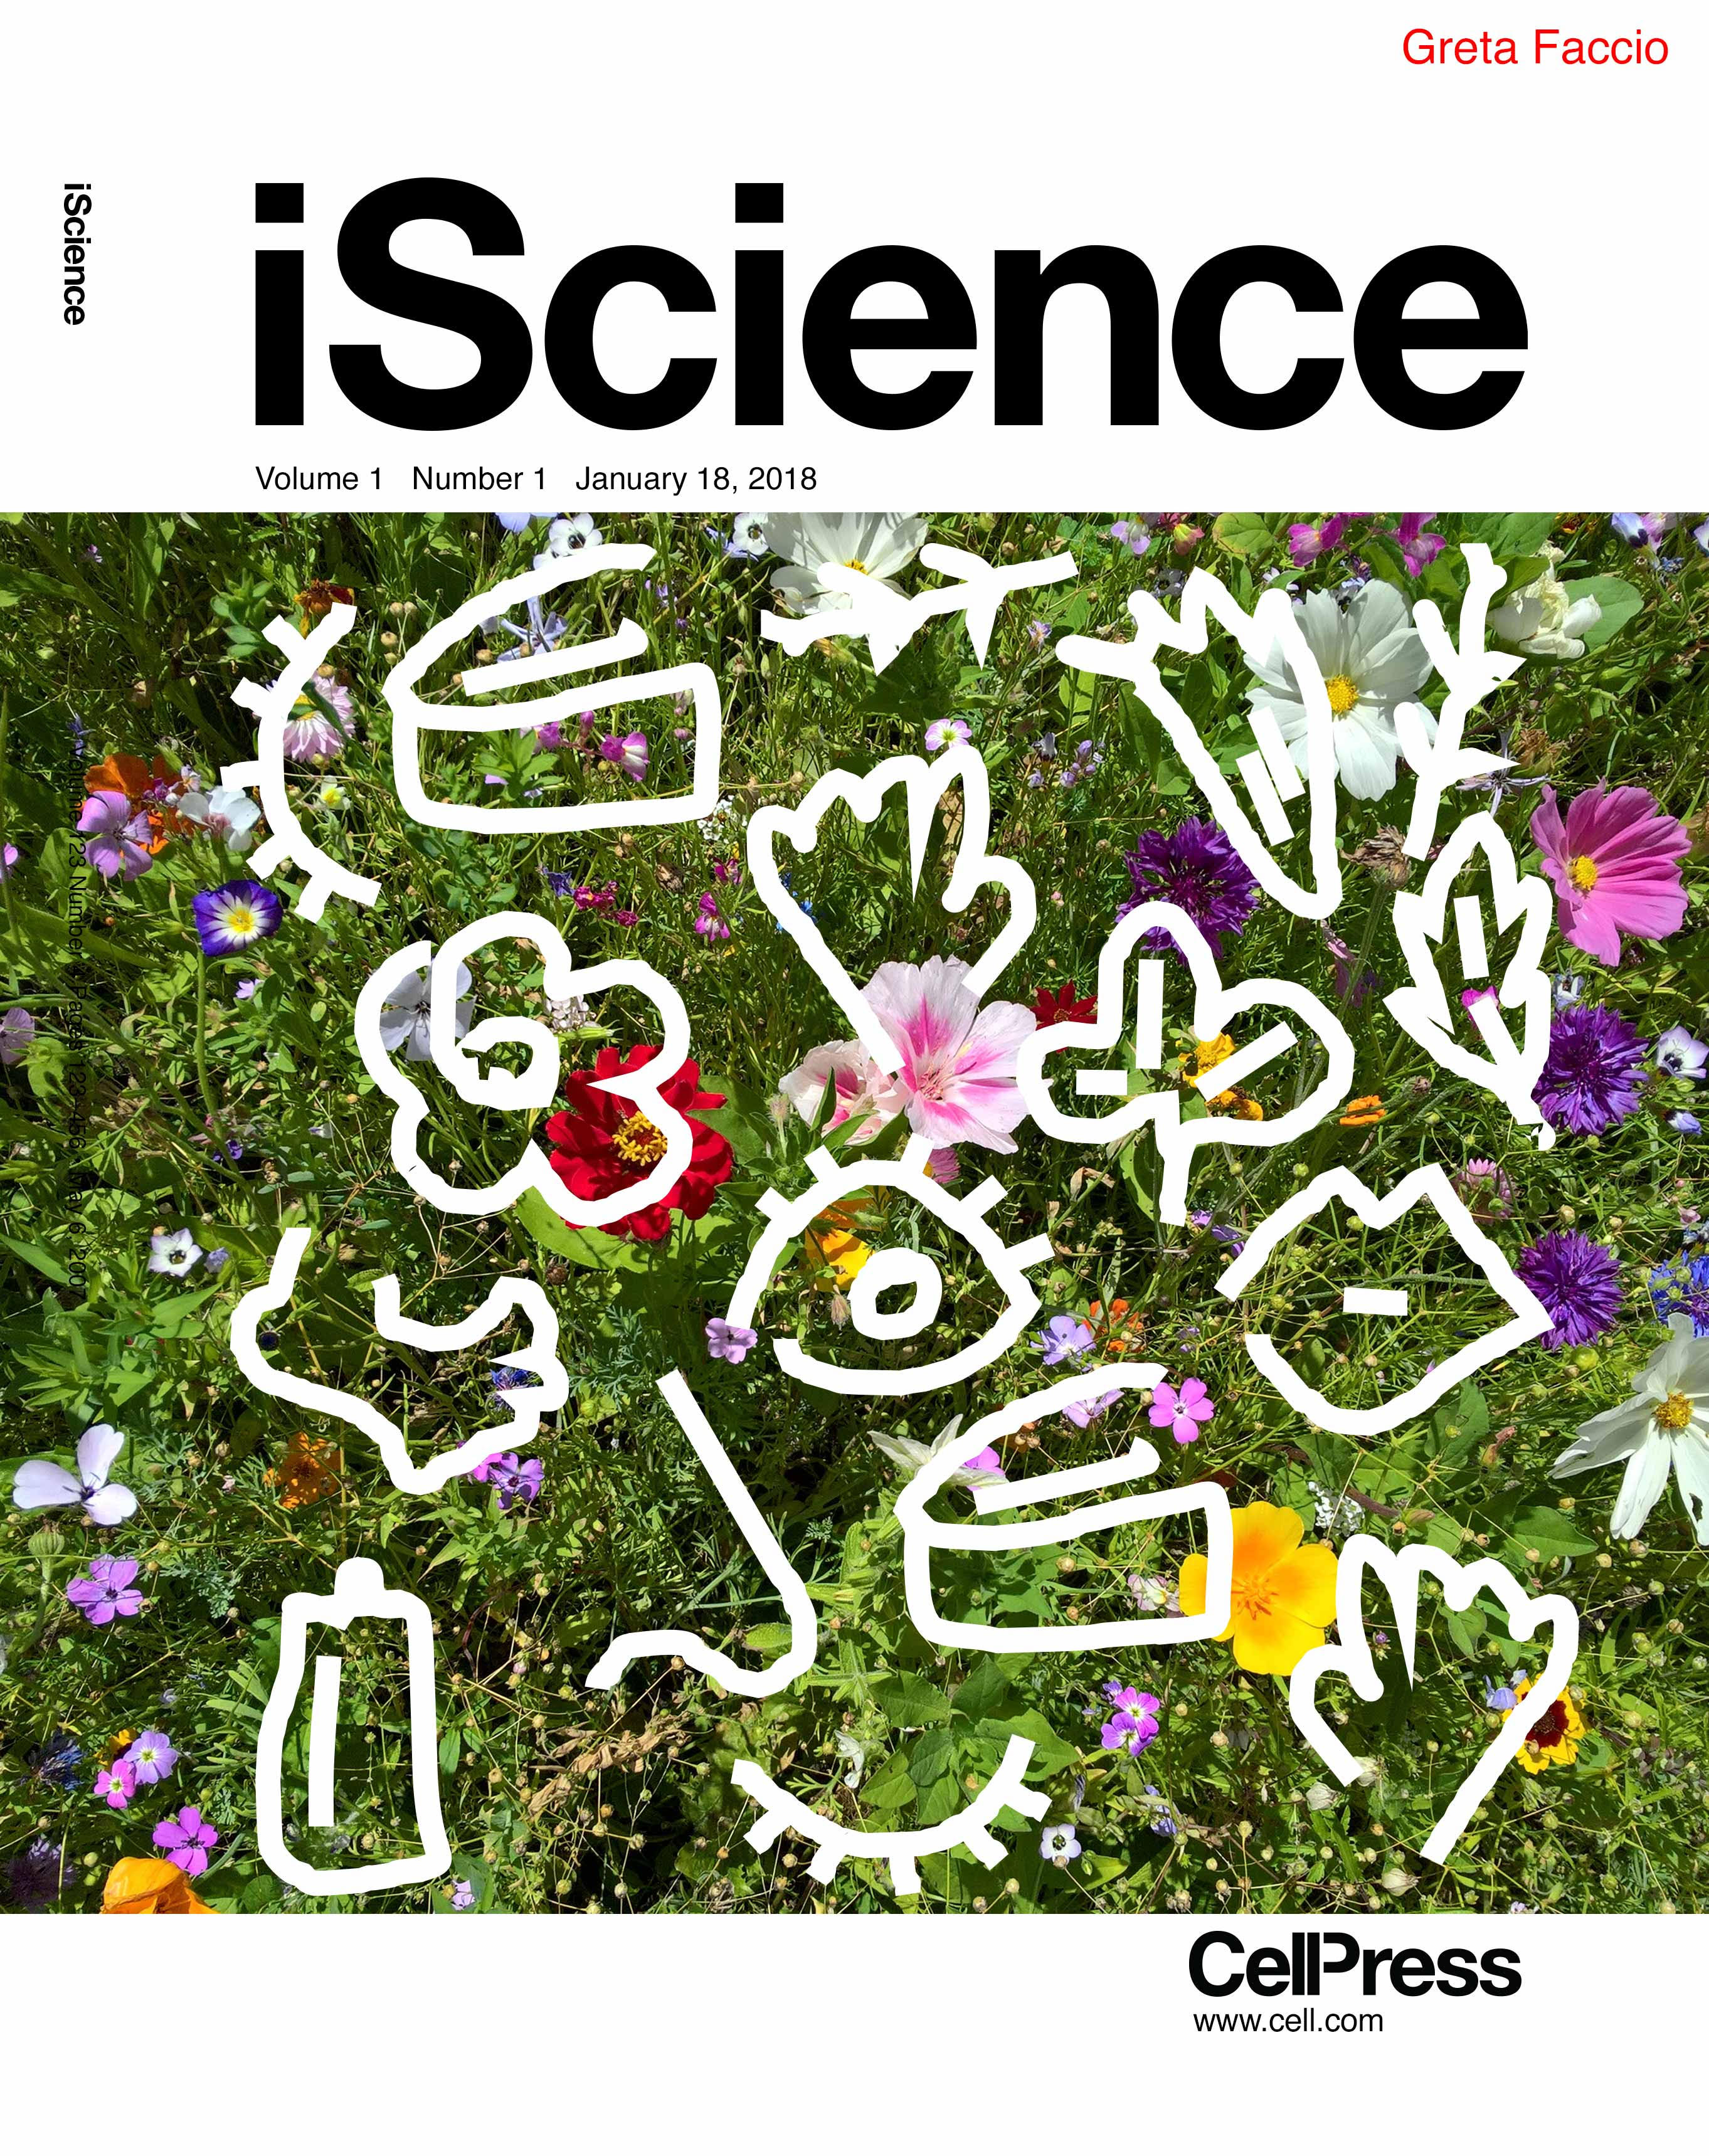 iScience suggested cover on Innovation in cosmetics offered by plants